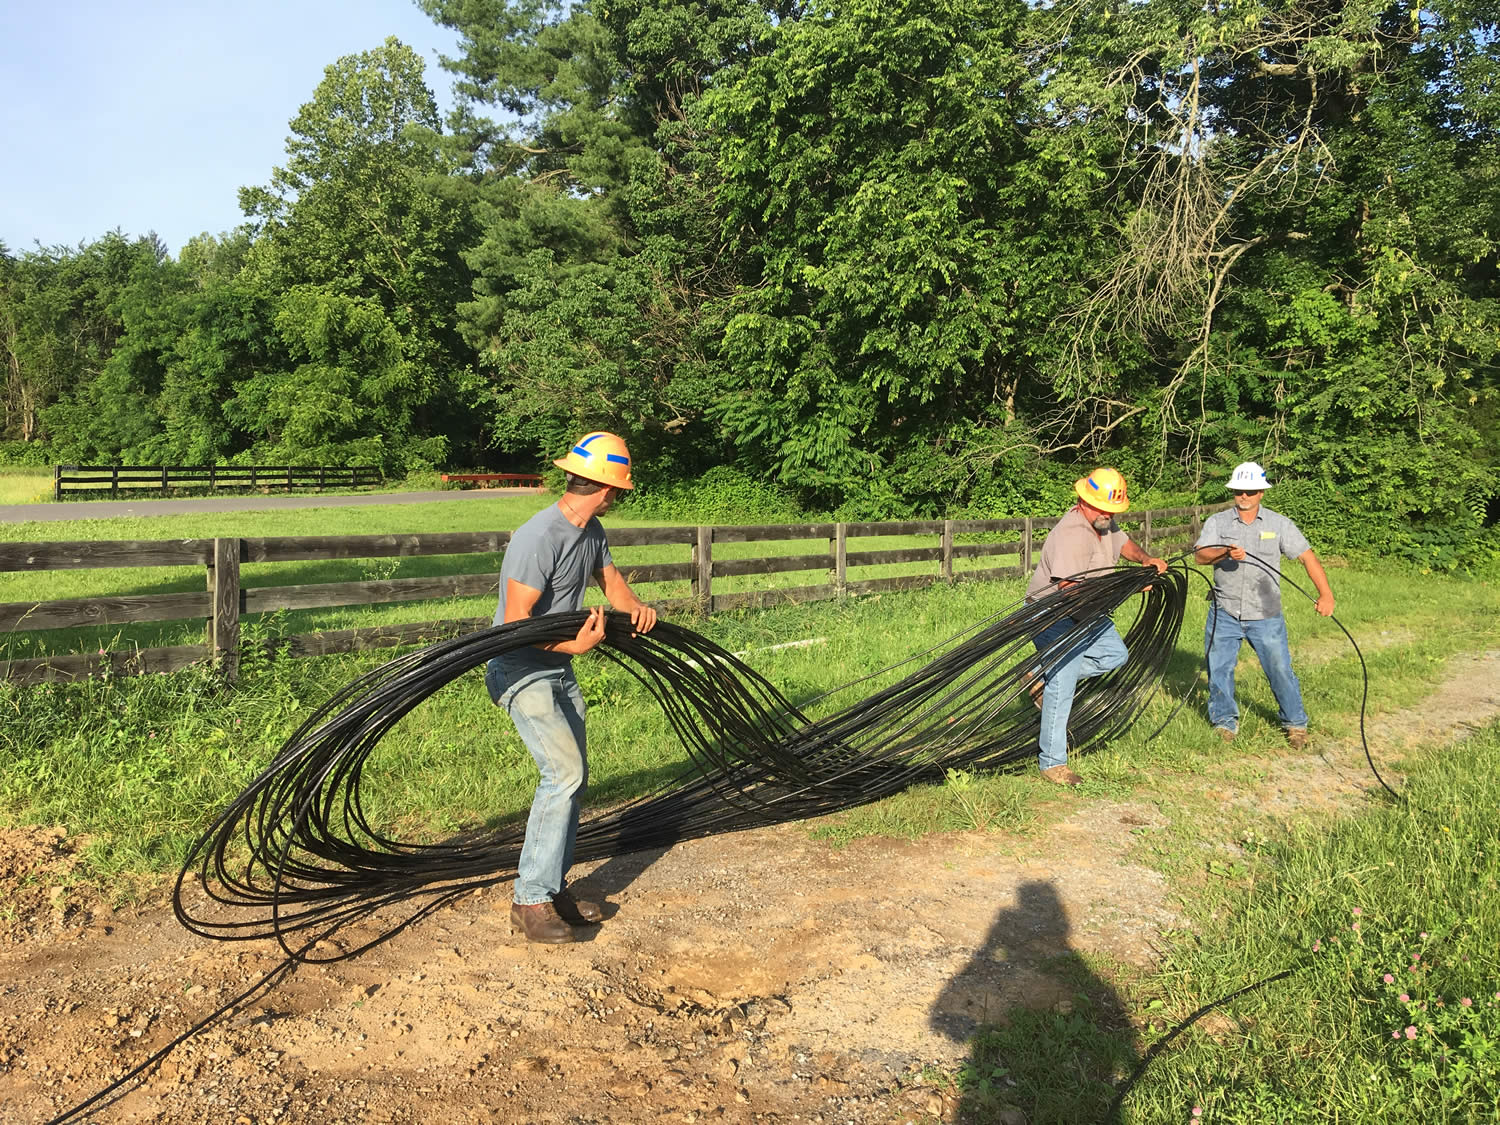 PennLine workers preparing fiber optic cable for pulling.